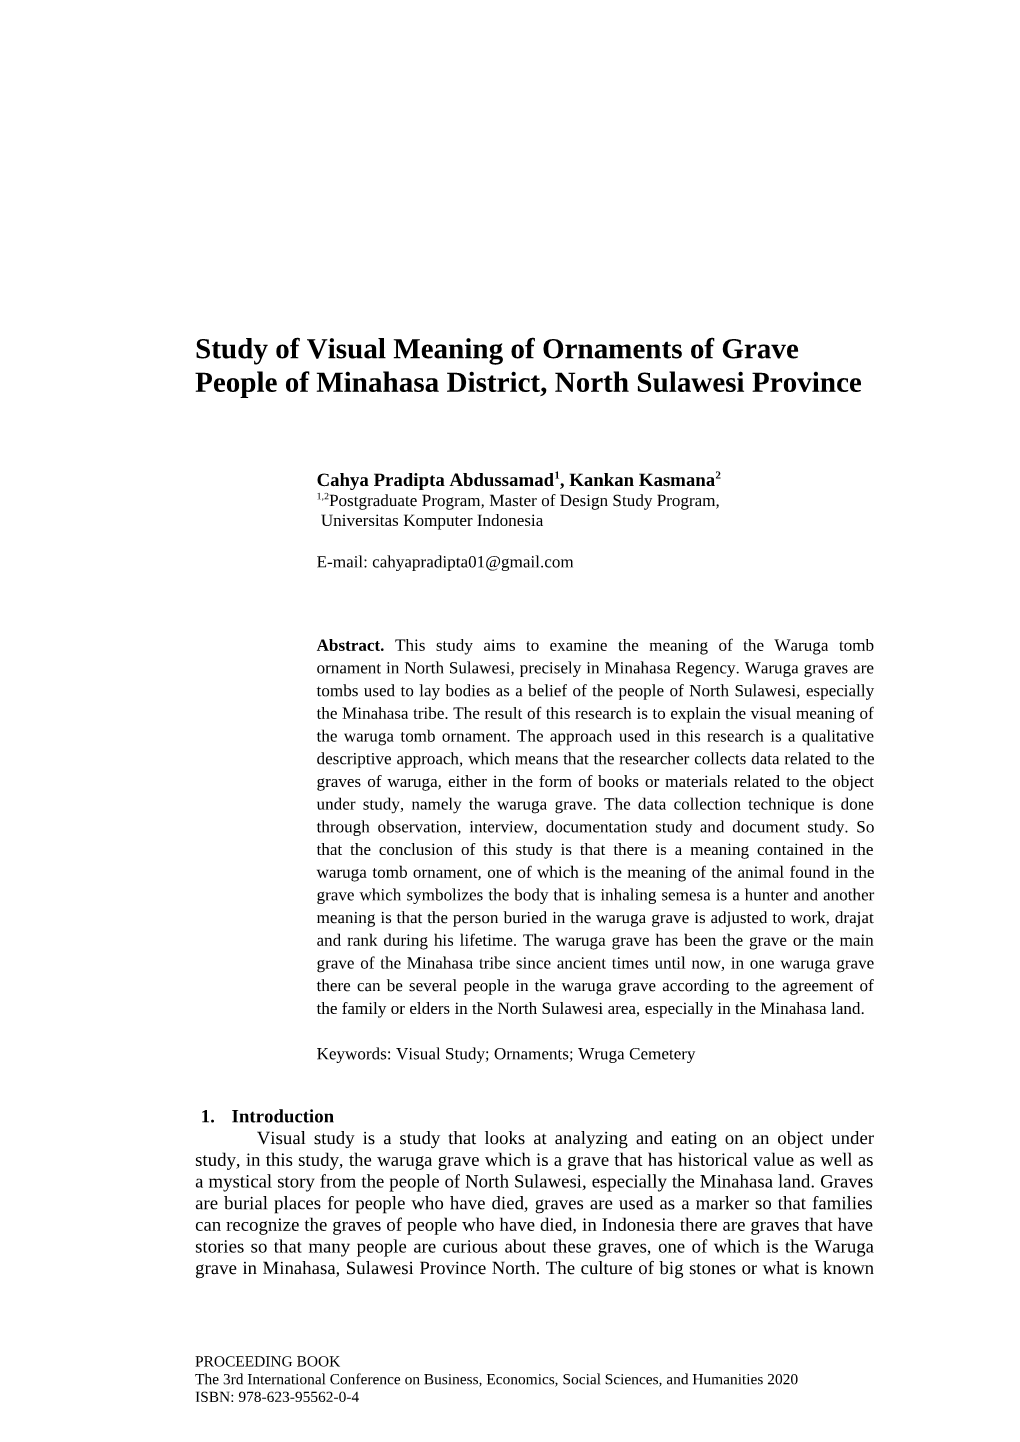 Study of Visual Meaning of Ornaments of Grave People of Minahasa District, North Sulawesi Province